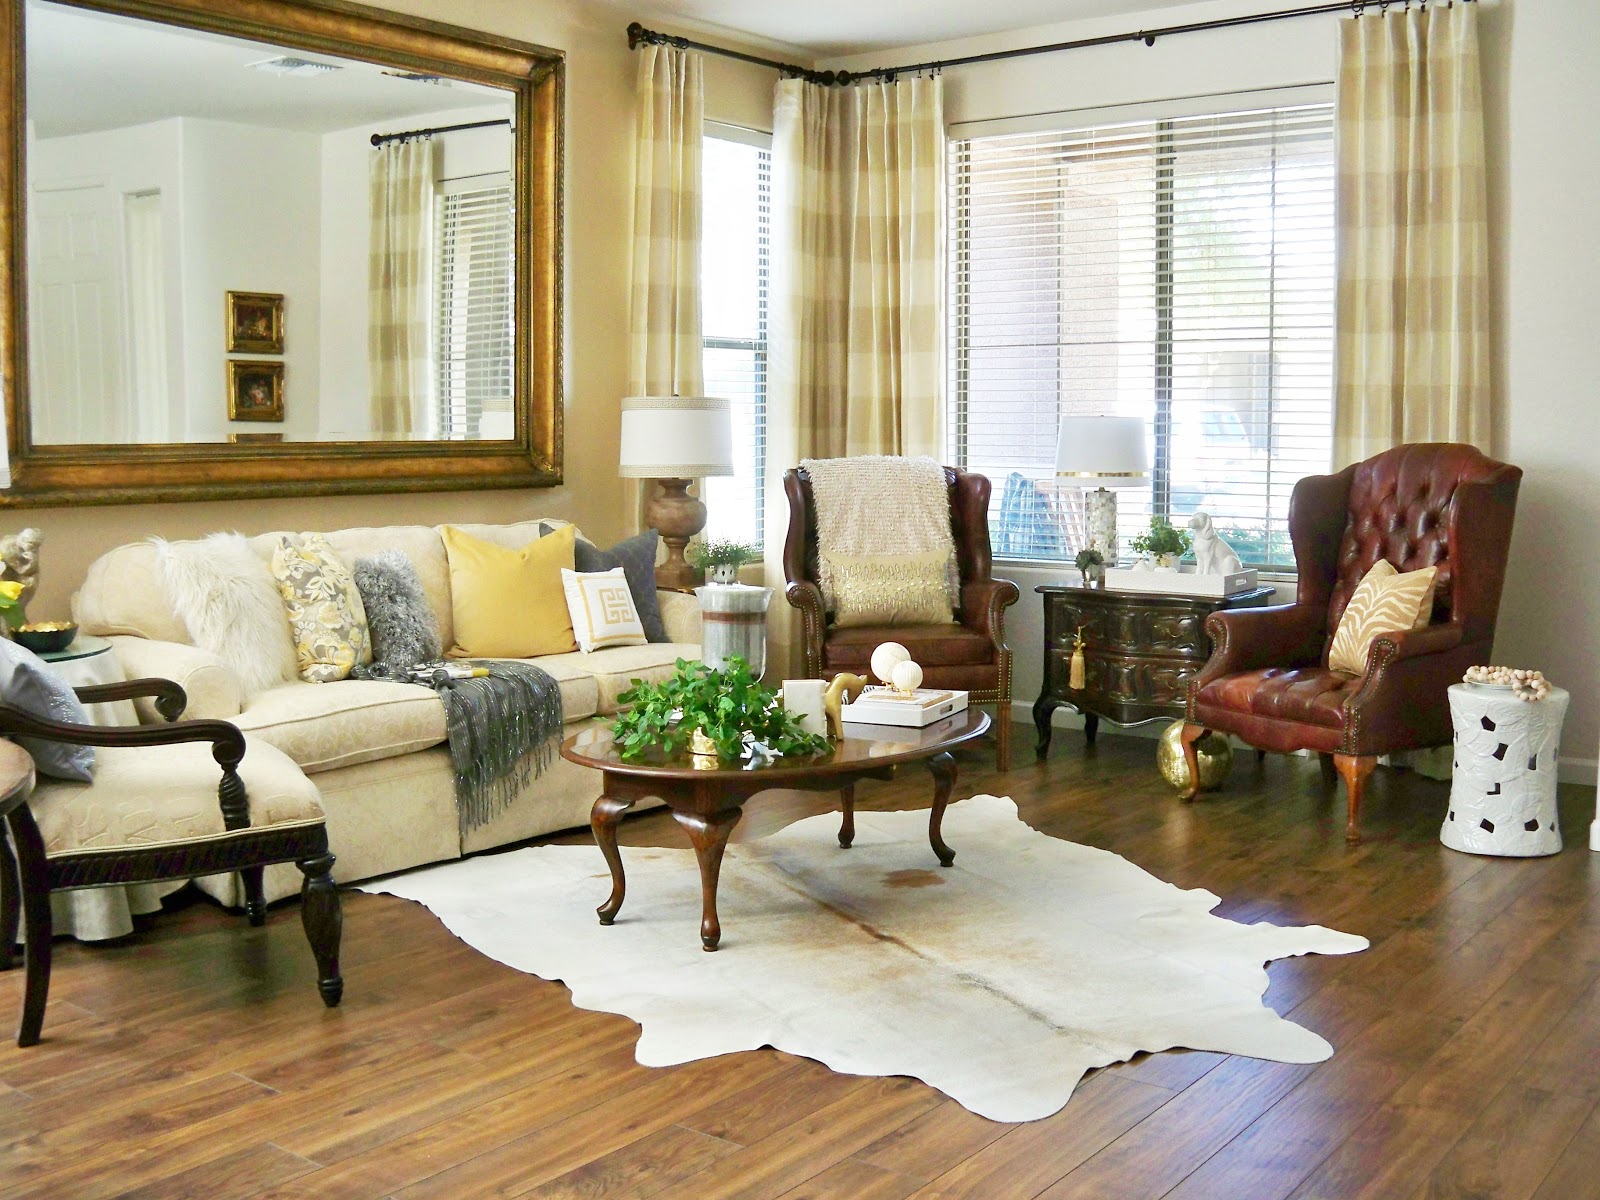 How To Use A Cowhide Rug - Tips